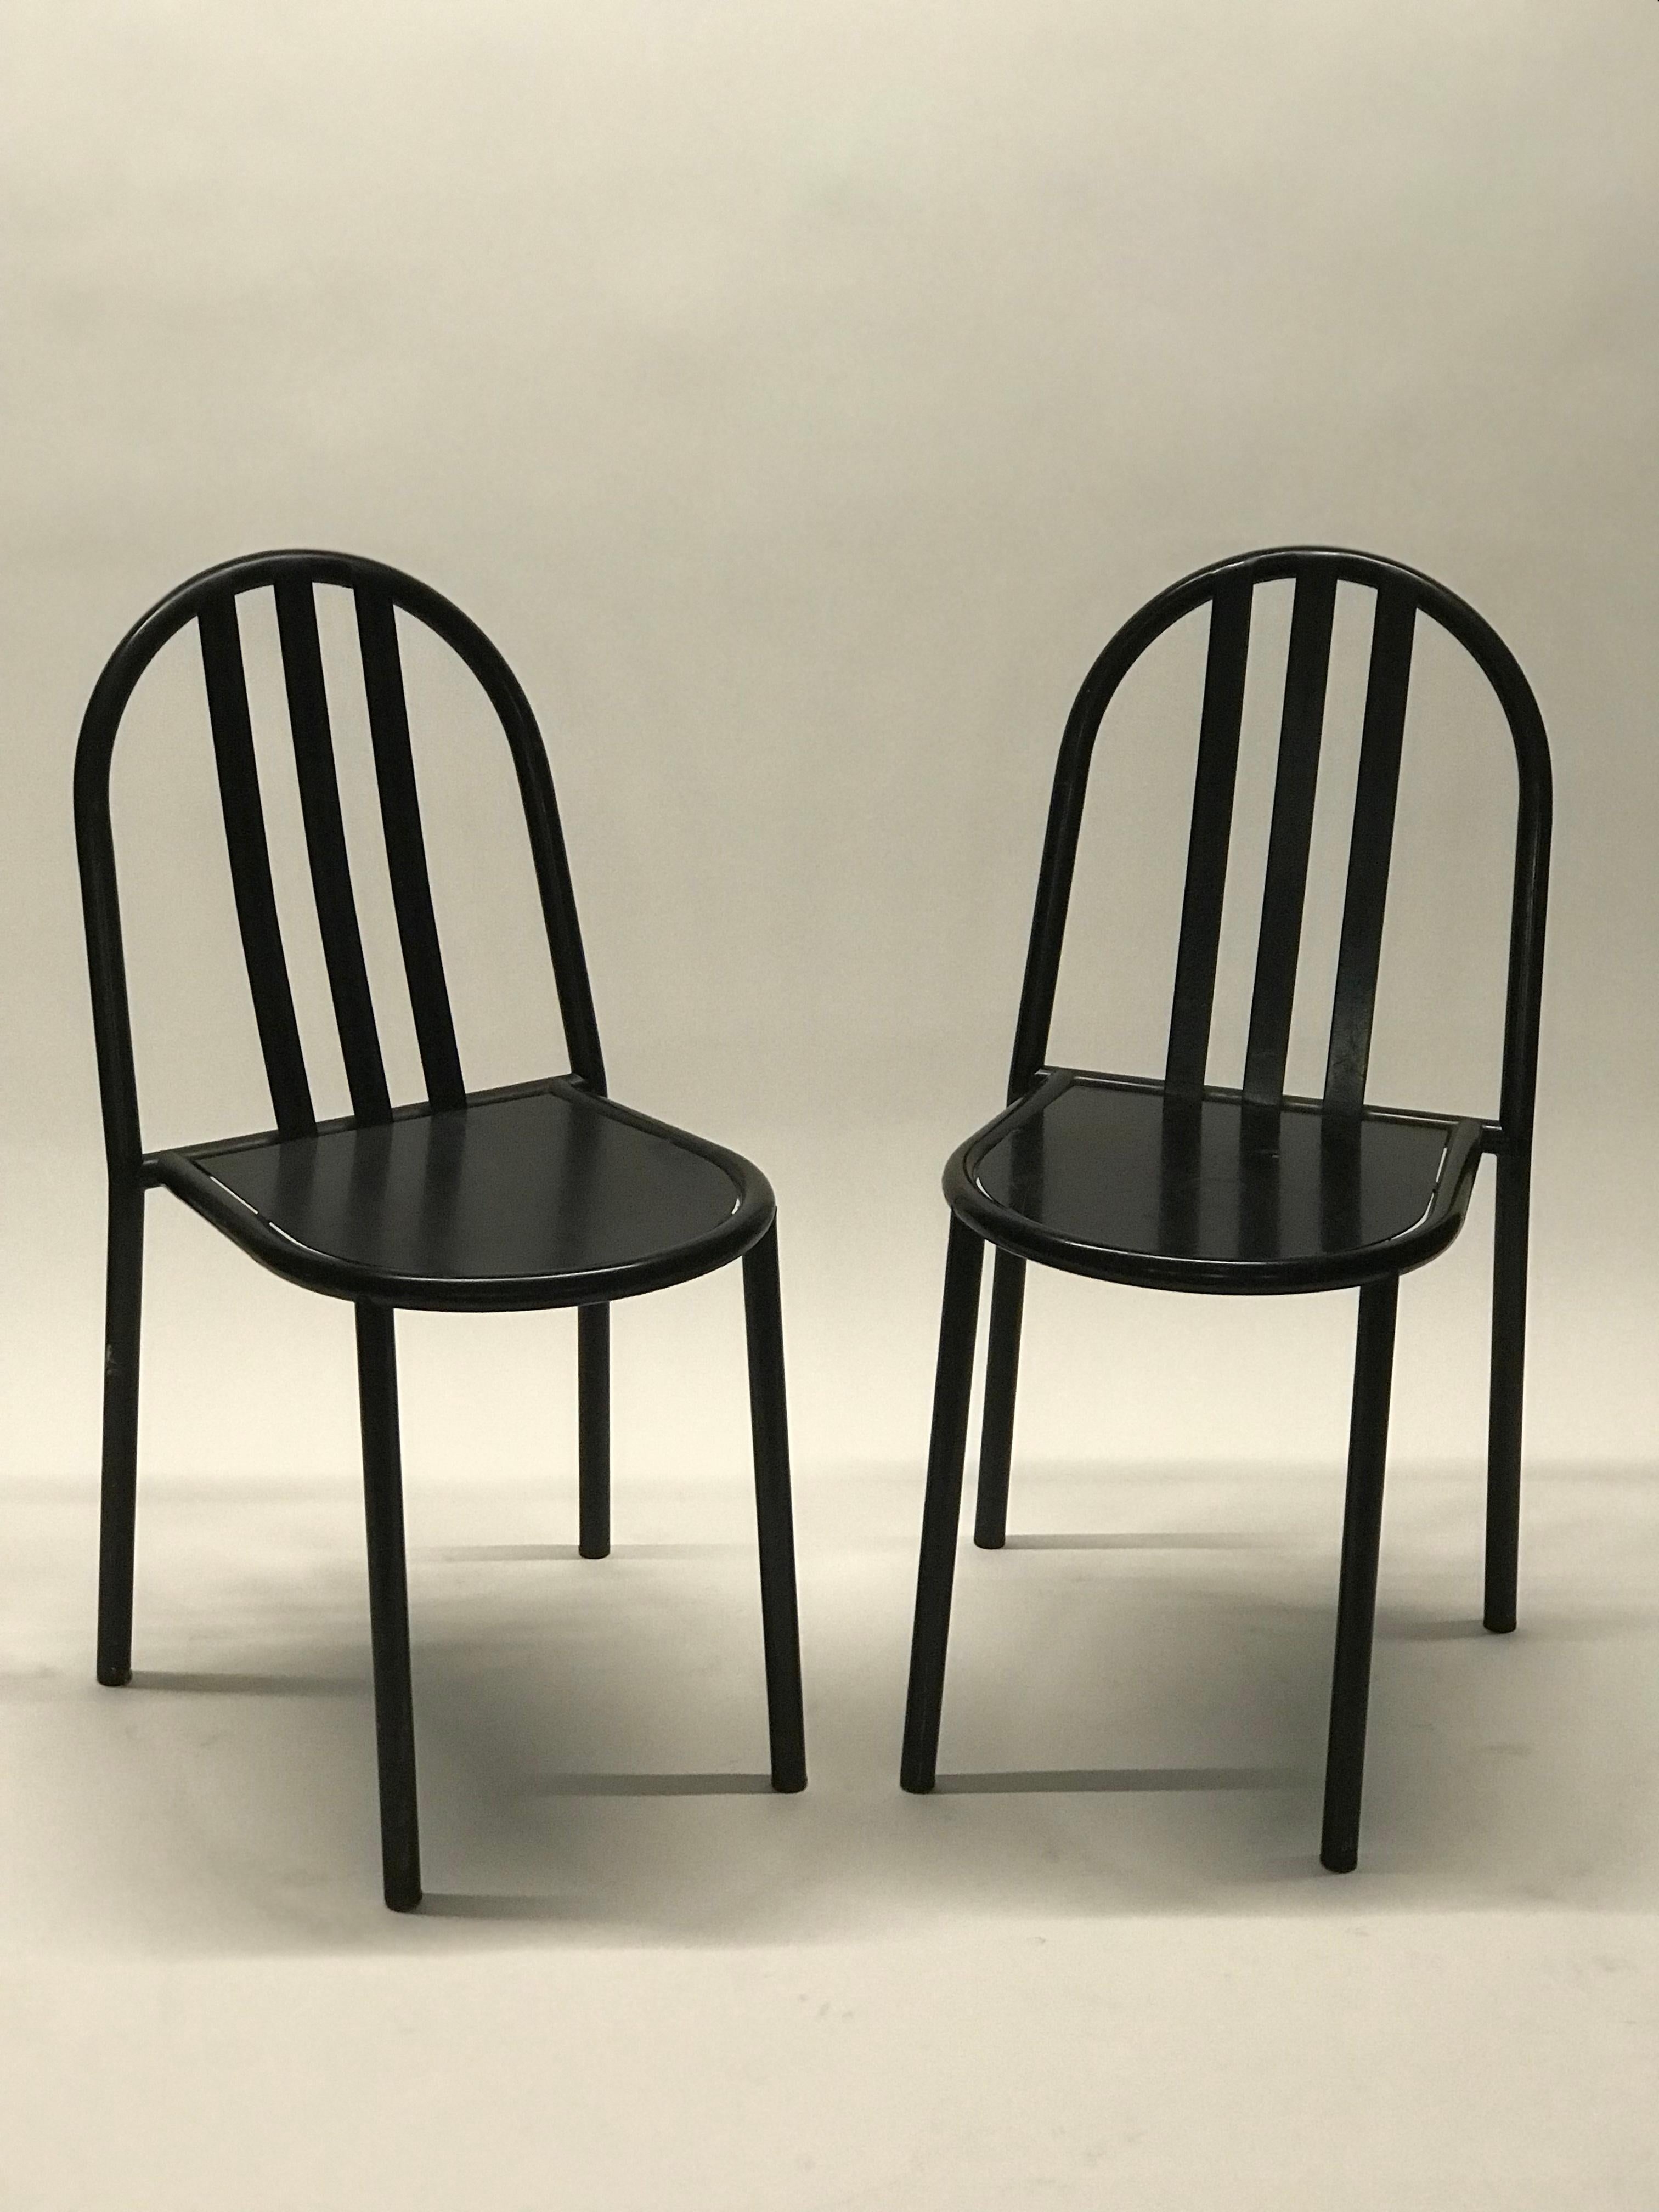 A pair of 1980's edition Robert Mallet Stevens No. 222 Stacking Chairs in vintage original black gloss finish. In excellent functional and structural condition the chair shows signs of wear associated with age and use, there are chips to the finish